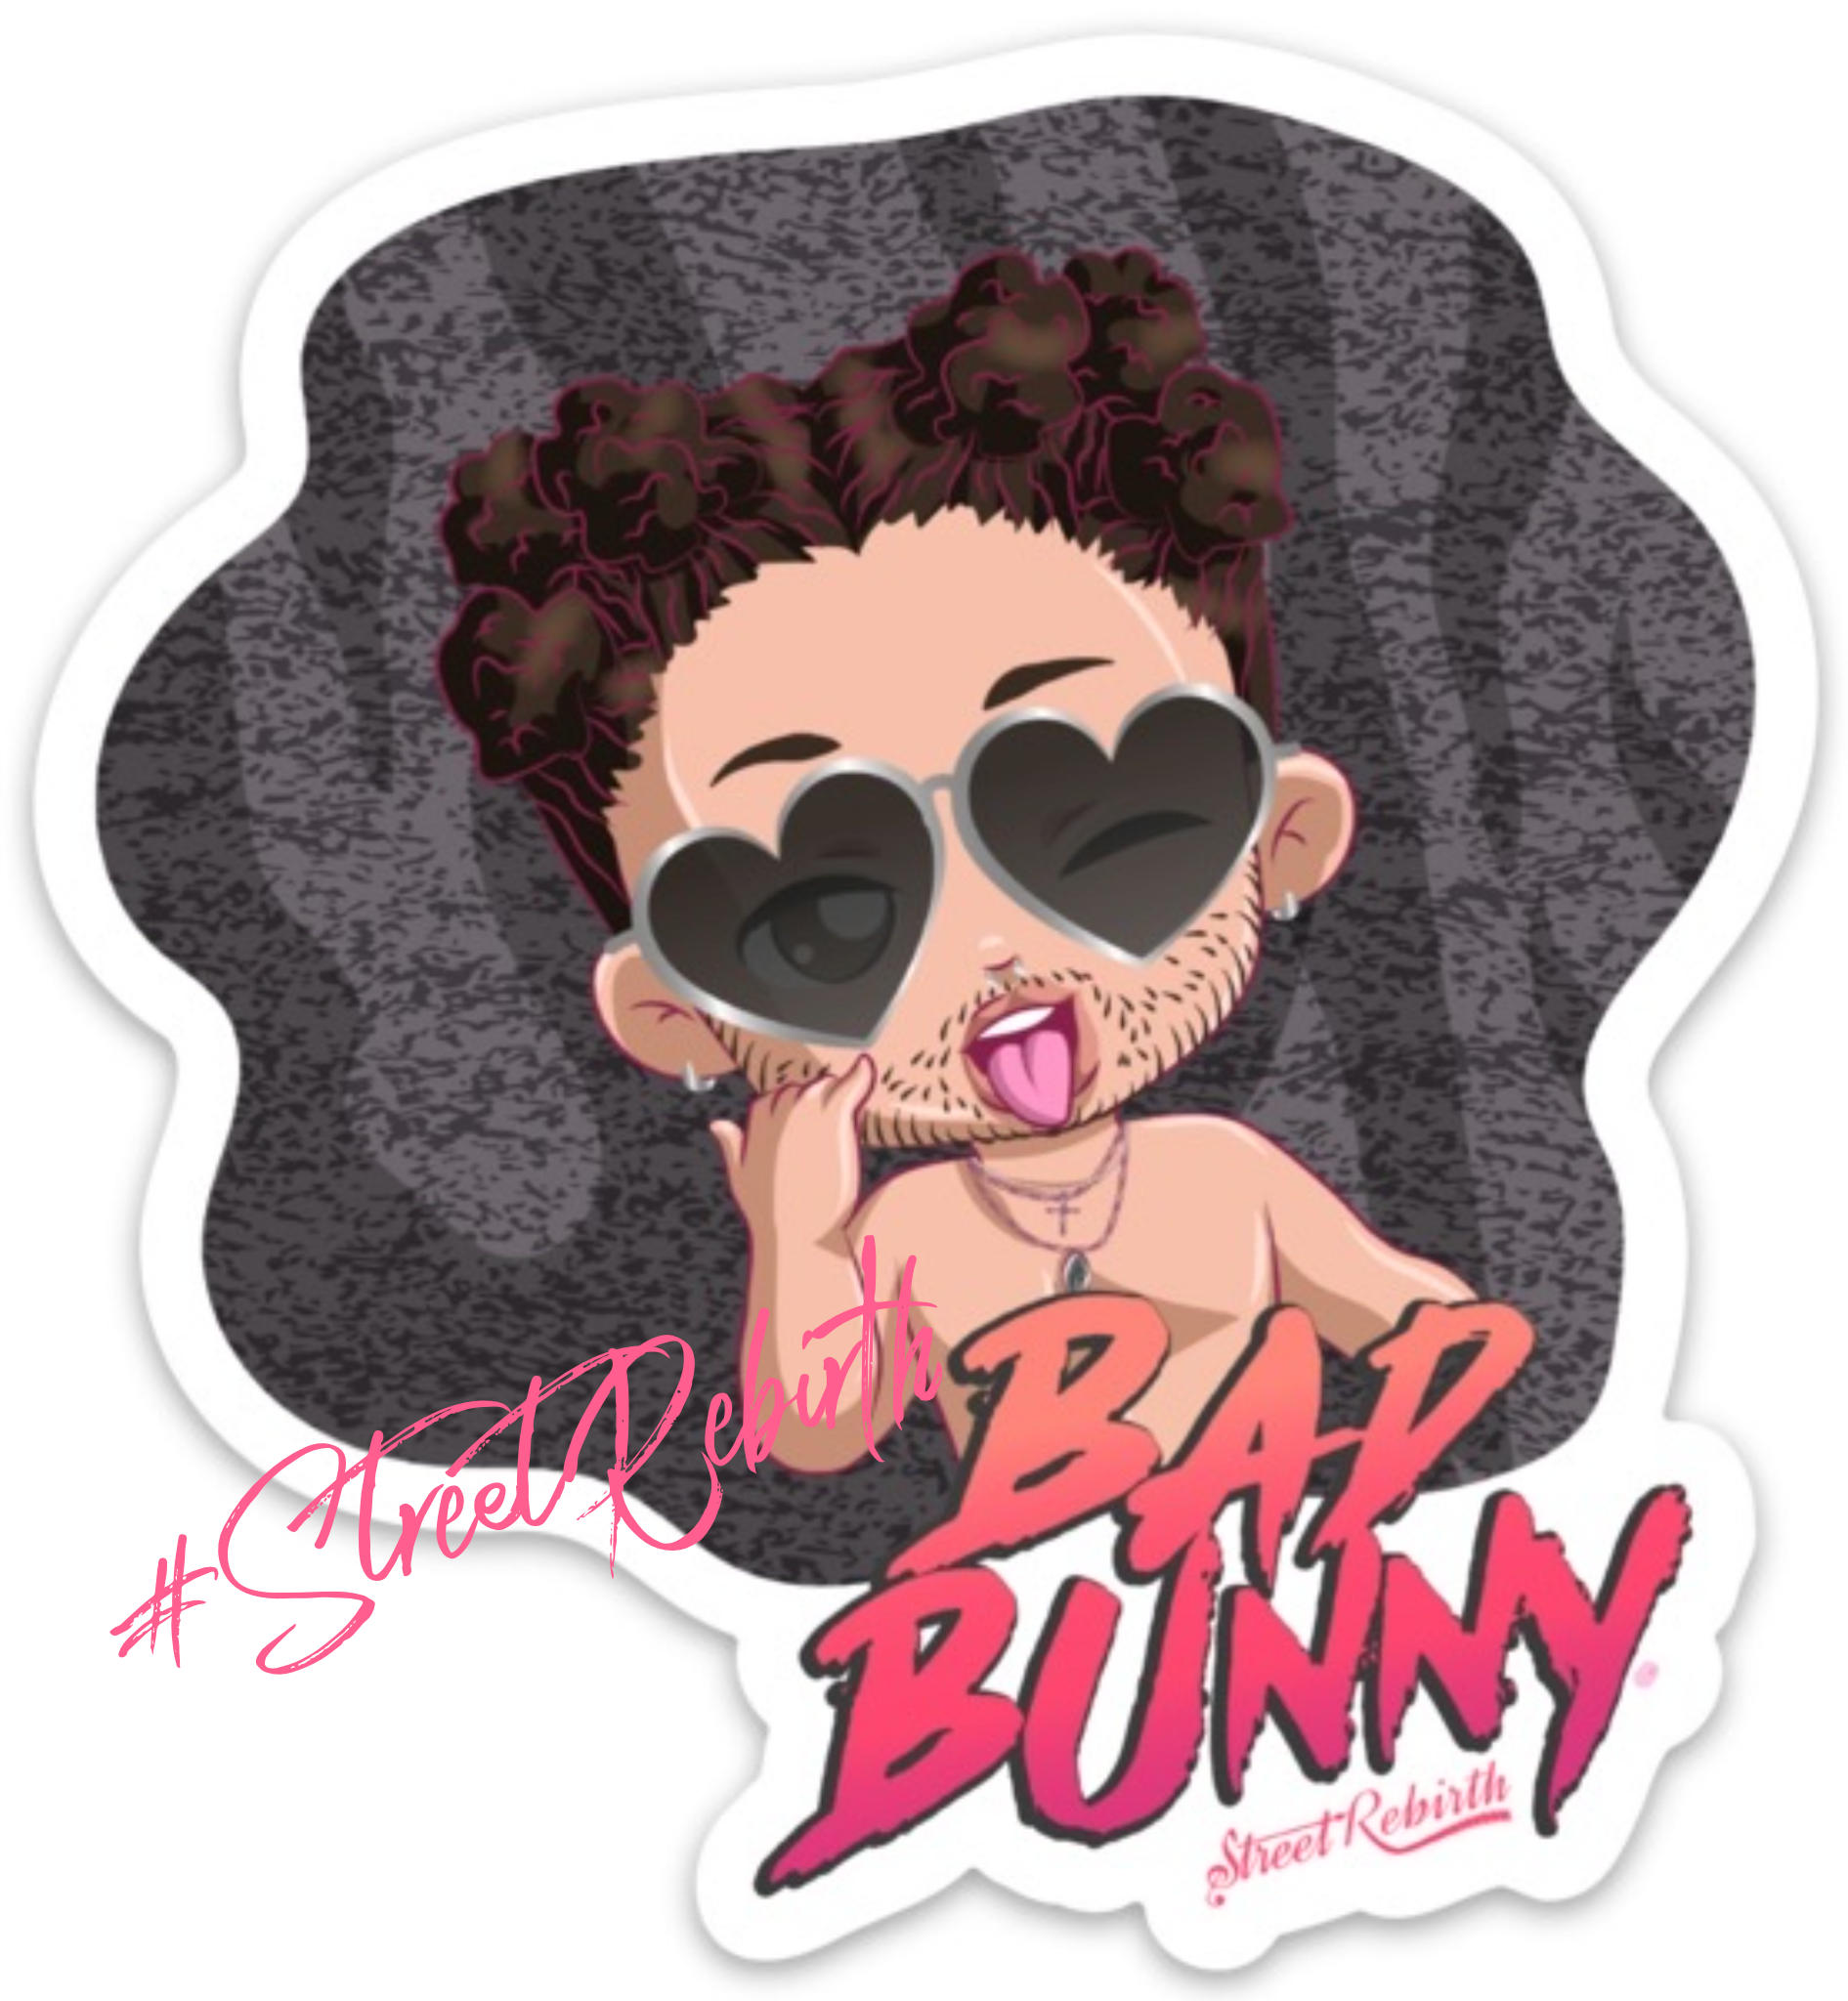 Bad Bunny Sticker – One 4 Inch Water Proof Vinyl Sticker – For Hydro Flask, Skateboard, Laptop, Planner, Car, Collecting, Gifting